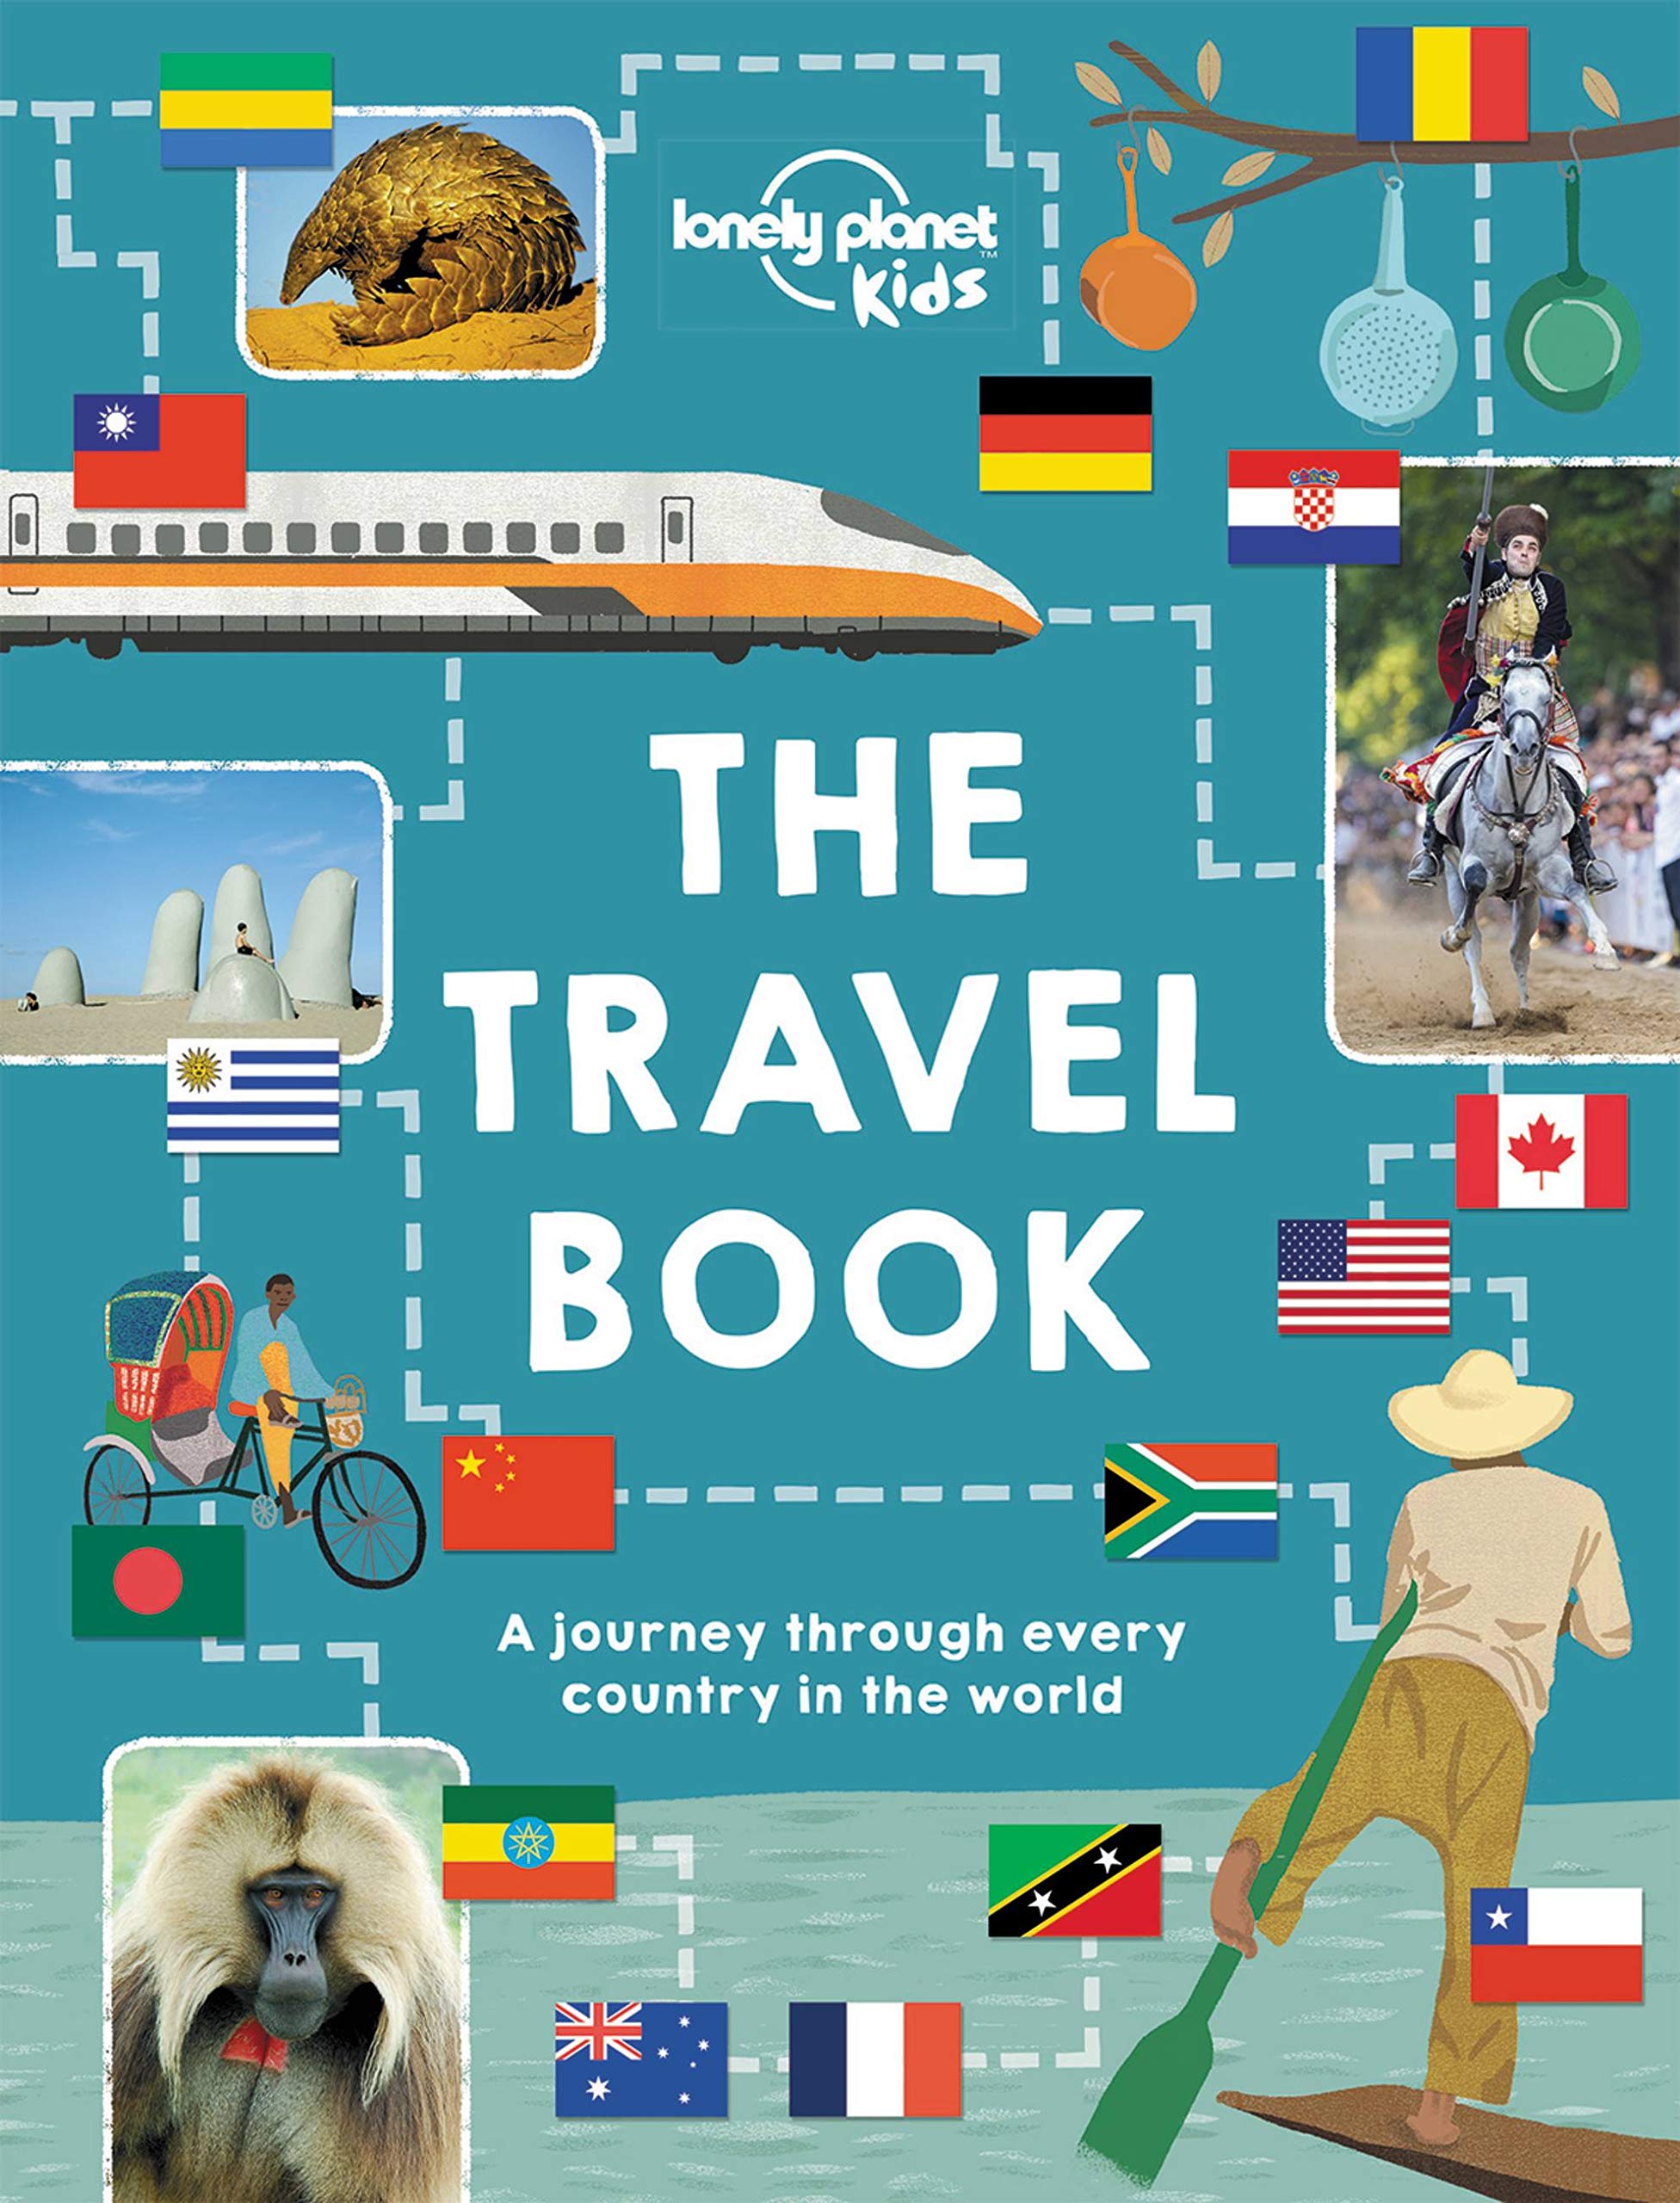 Book:　–　In　A　Every　Journey　World　The　Through　Country　Travel　The　BookXcess